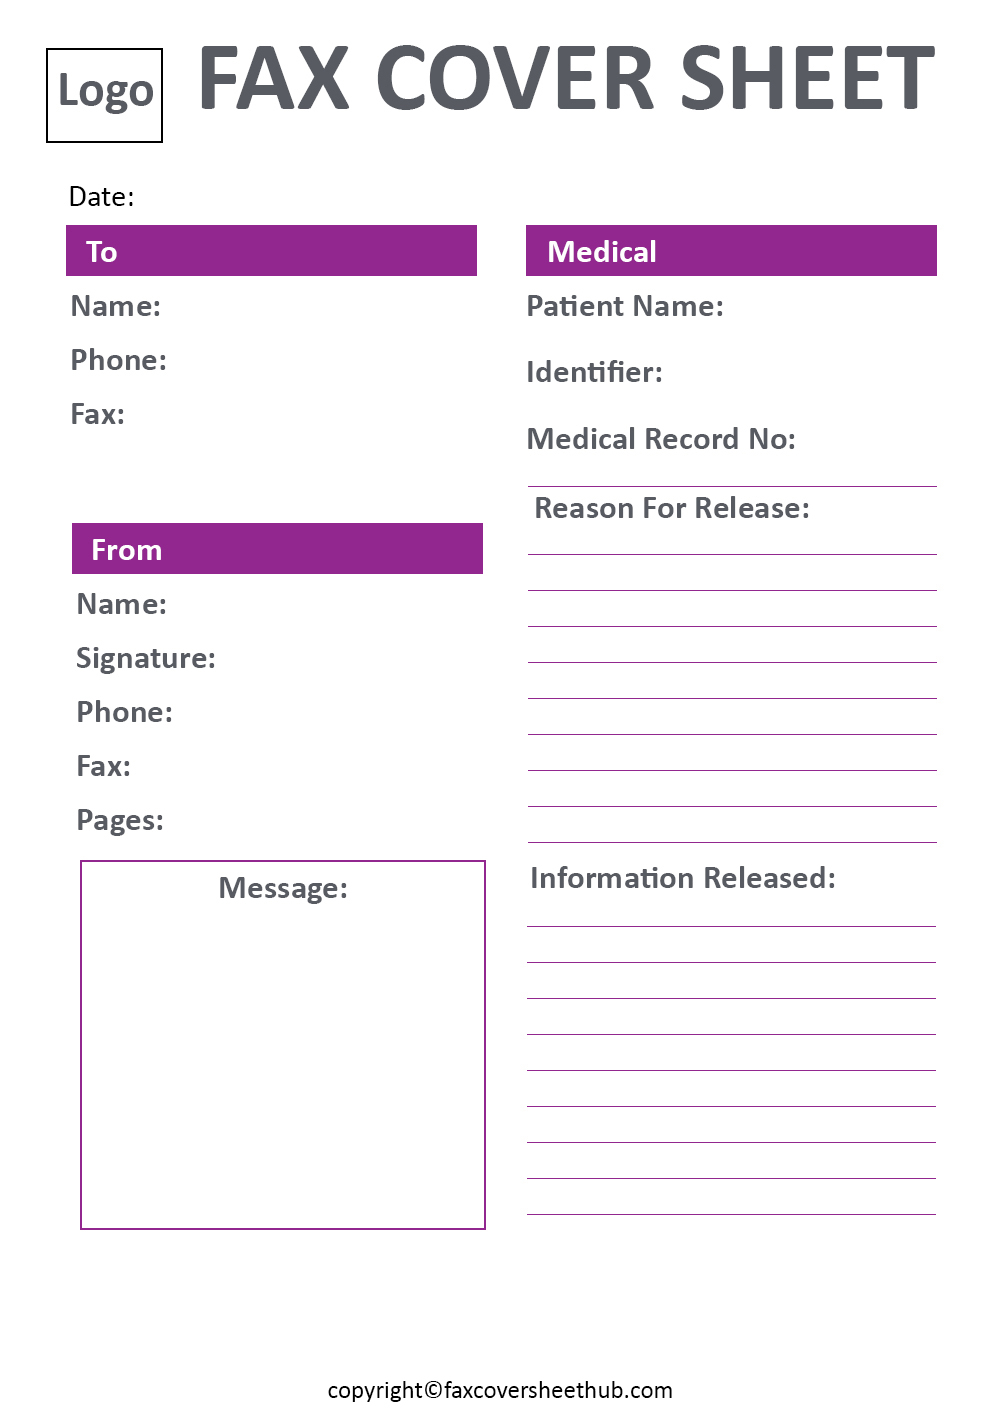 Health Care Fax Cover Sheet